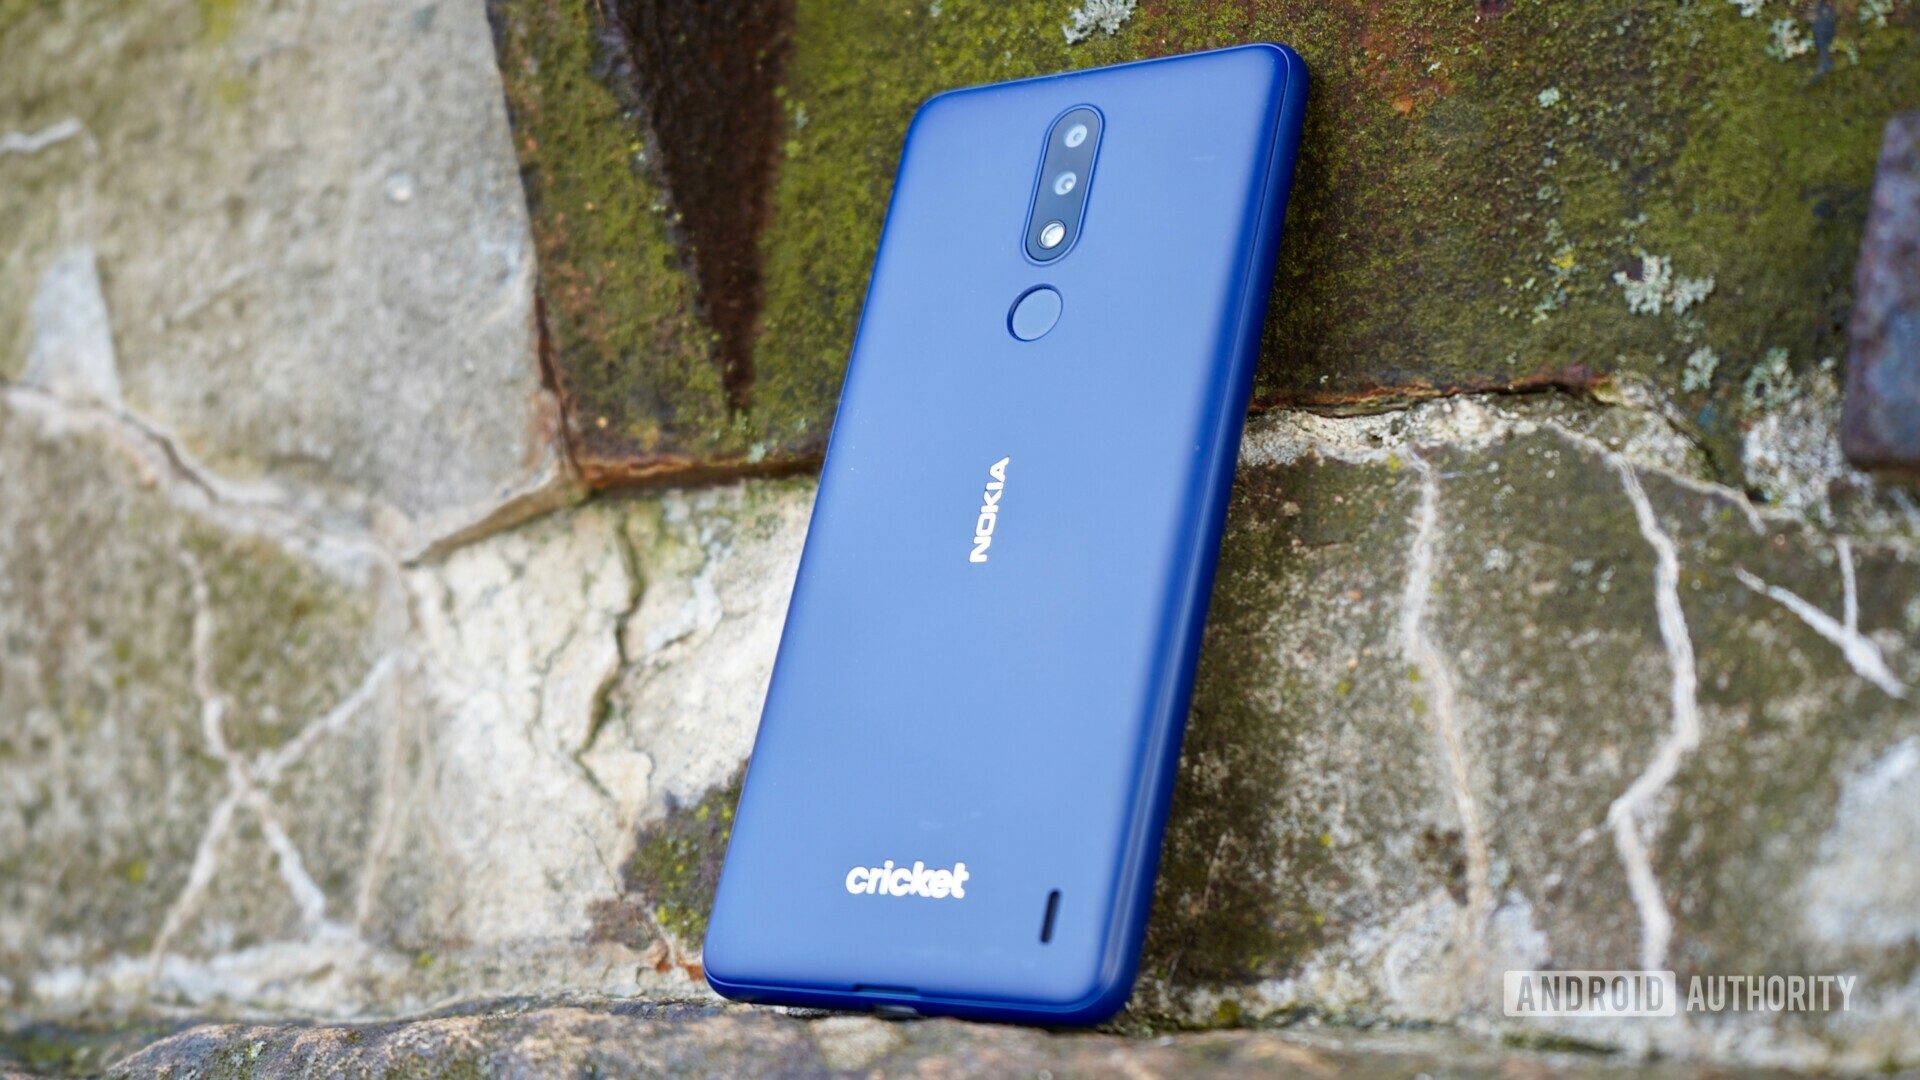 Back side view of the Blue Nokia 3.1 Plus on a stone.